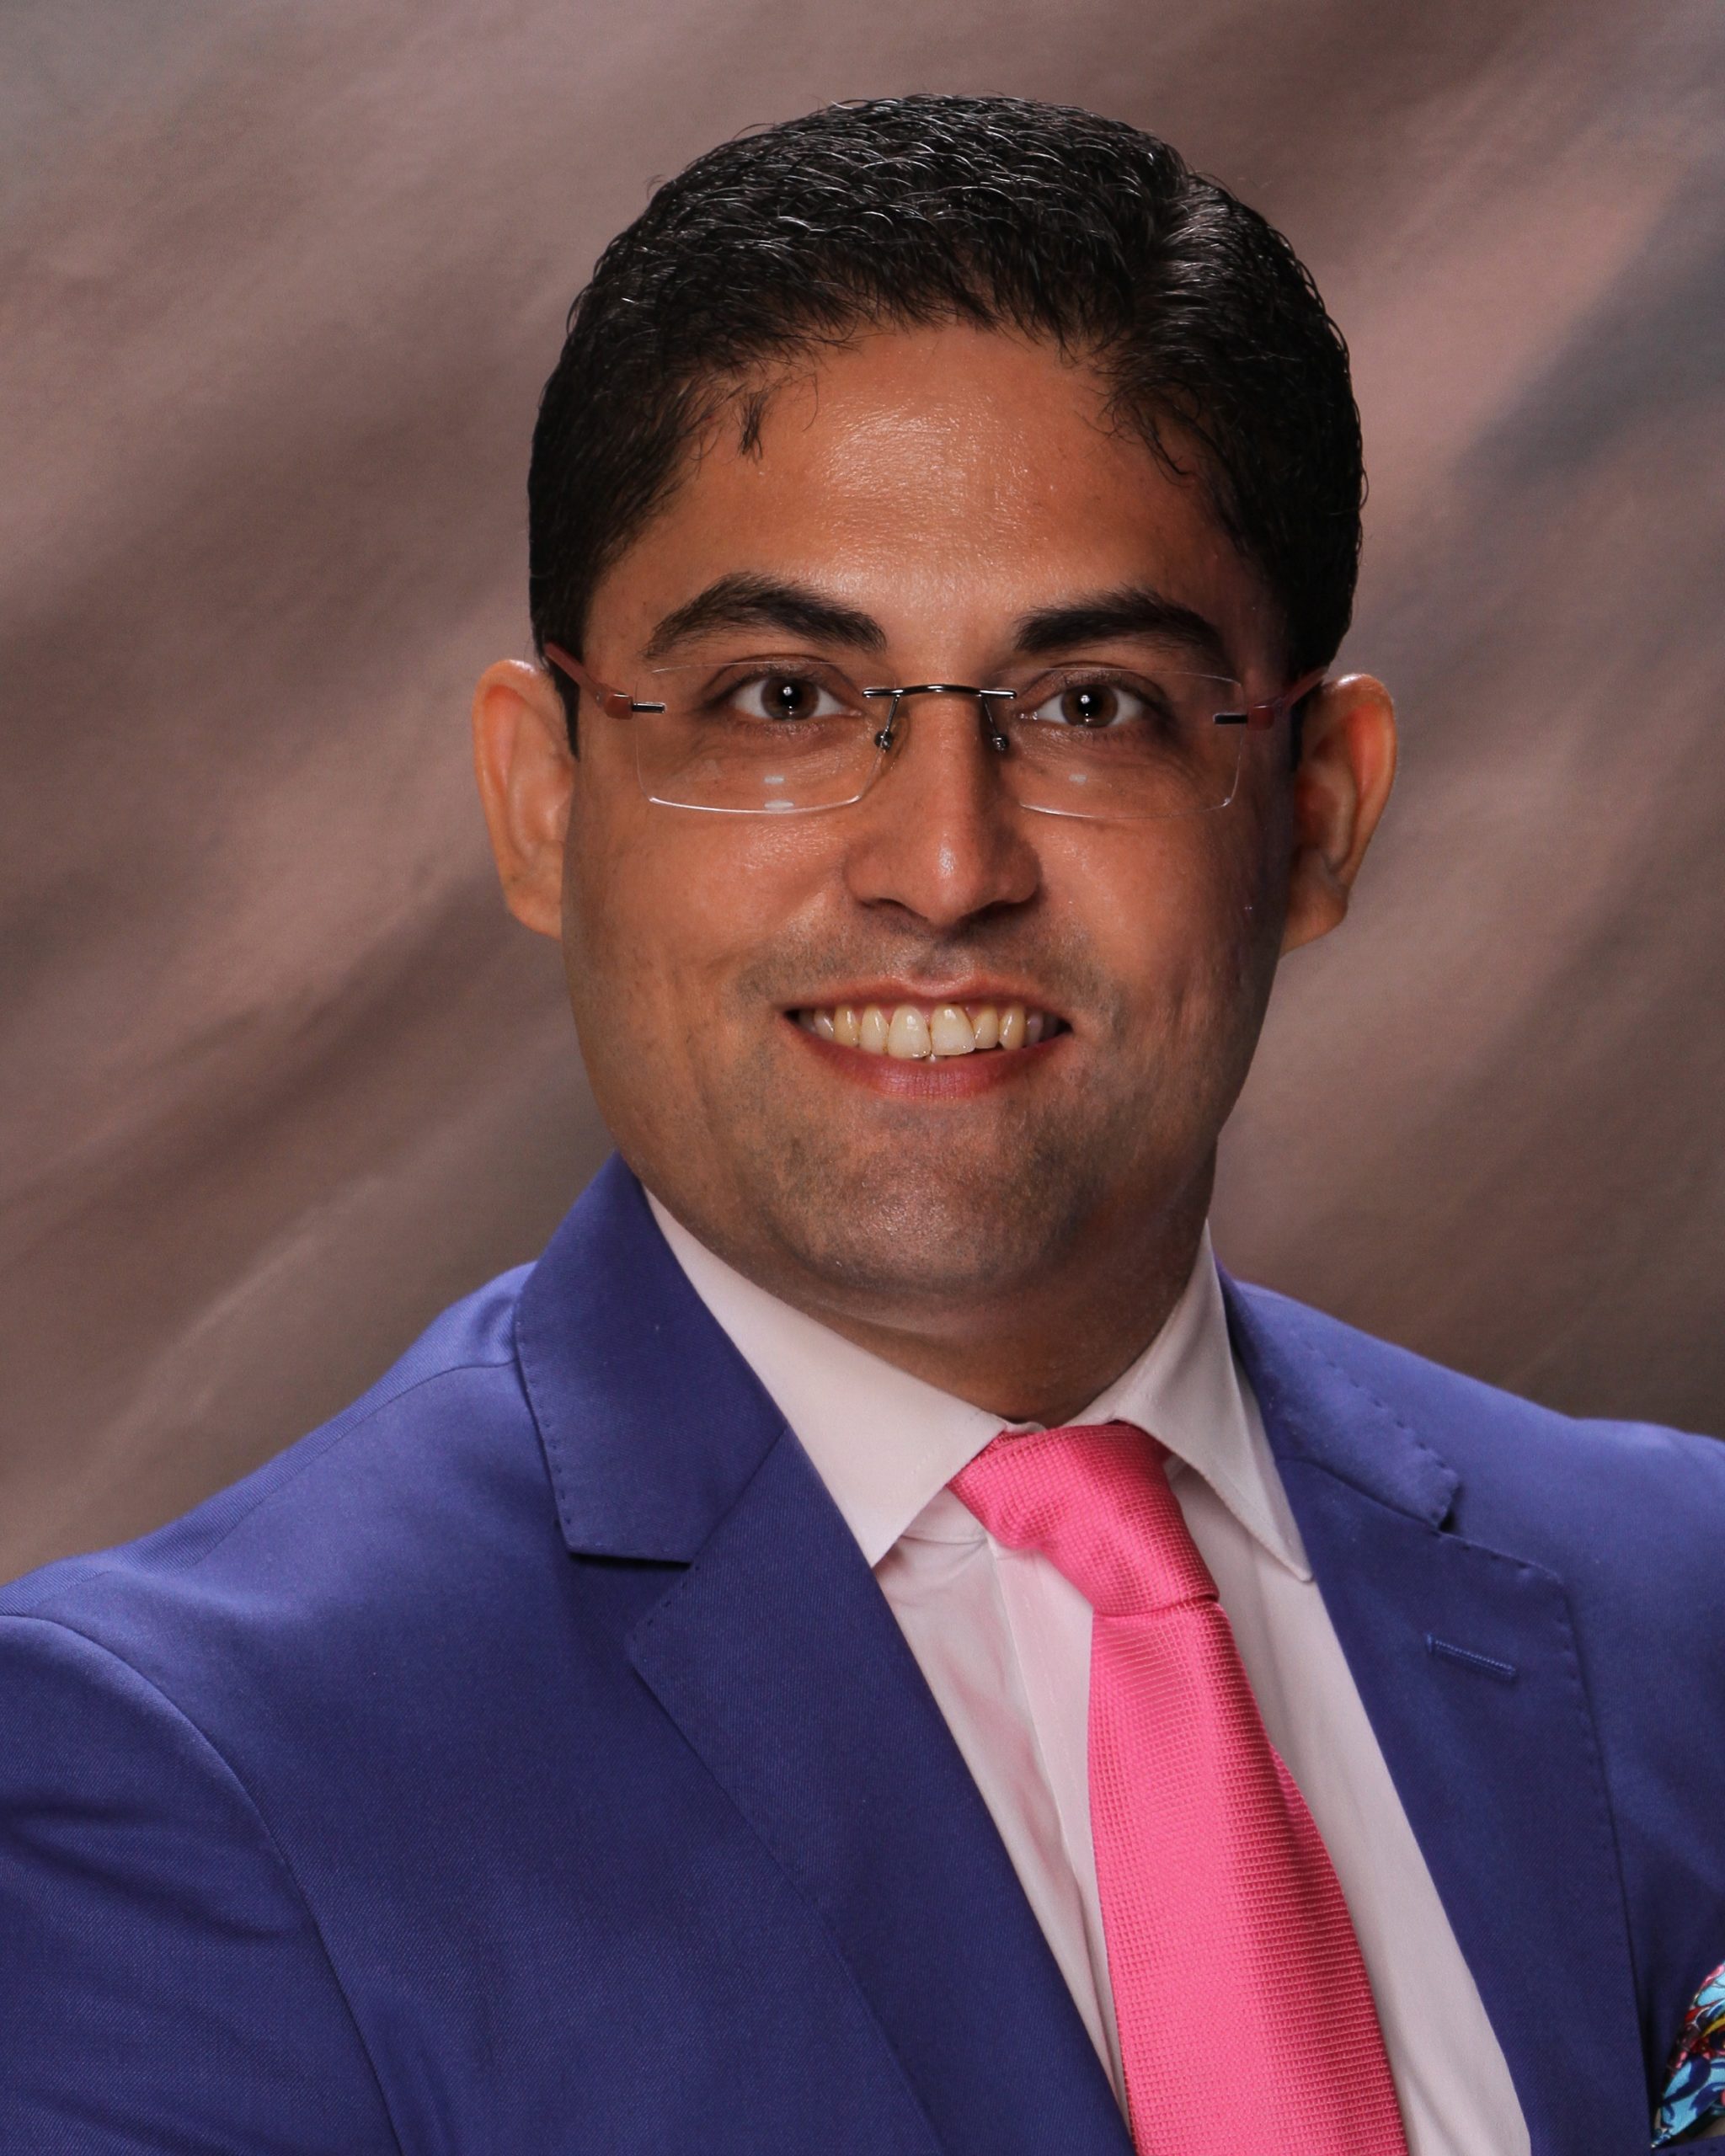 Bhuvnesh Kaul, Director of Sales at The Imperial